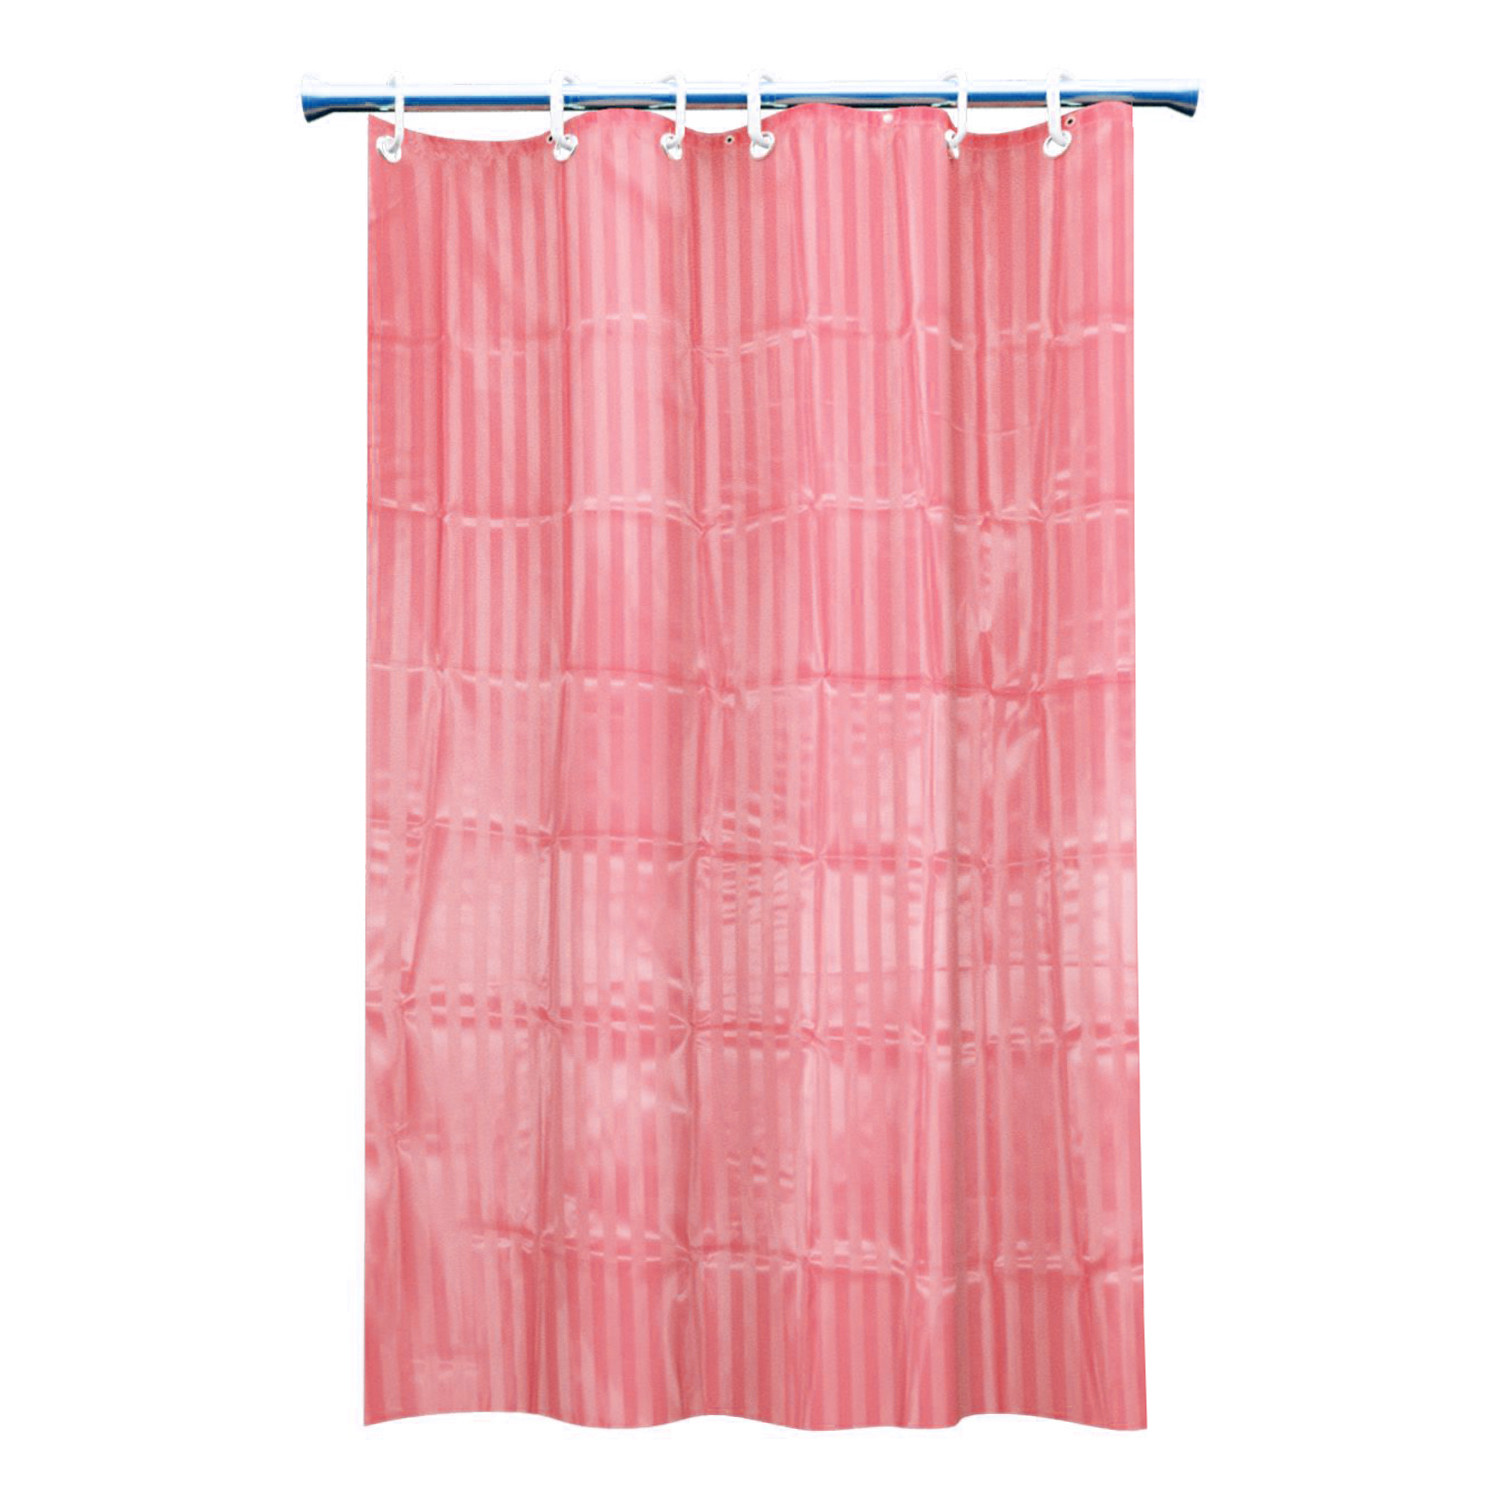 Kuber Industries 7 Feet PVC Shower Curtain/AC Curtain For Bathroom, Living Room With 8 Hooks (Pink)